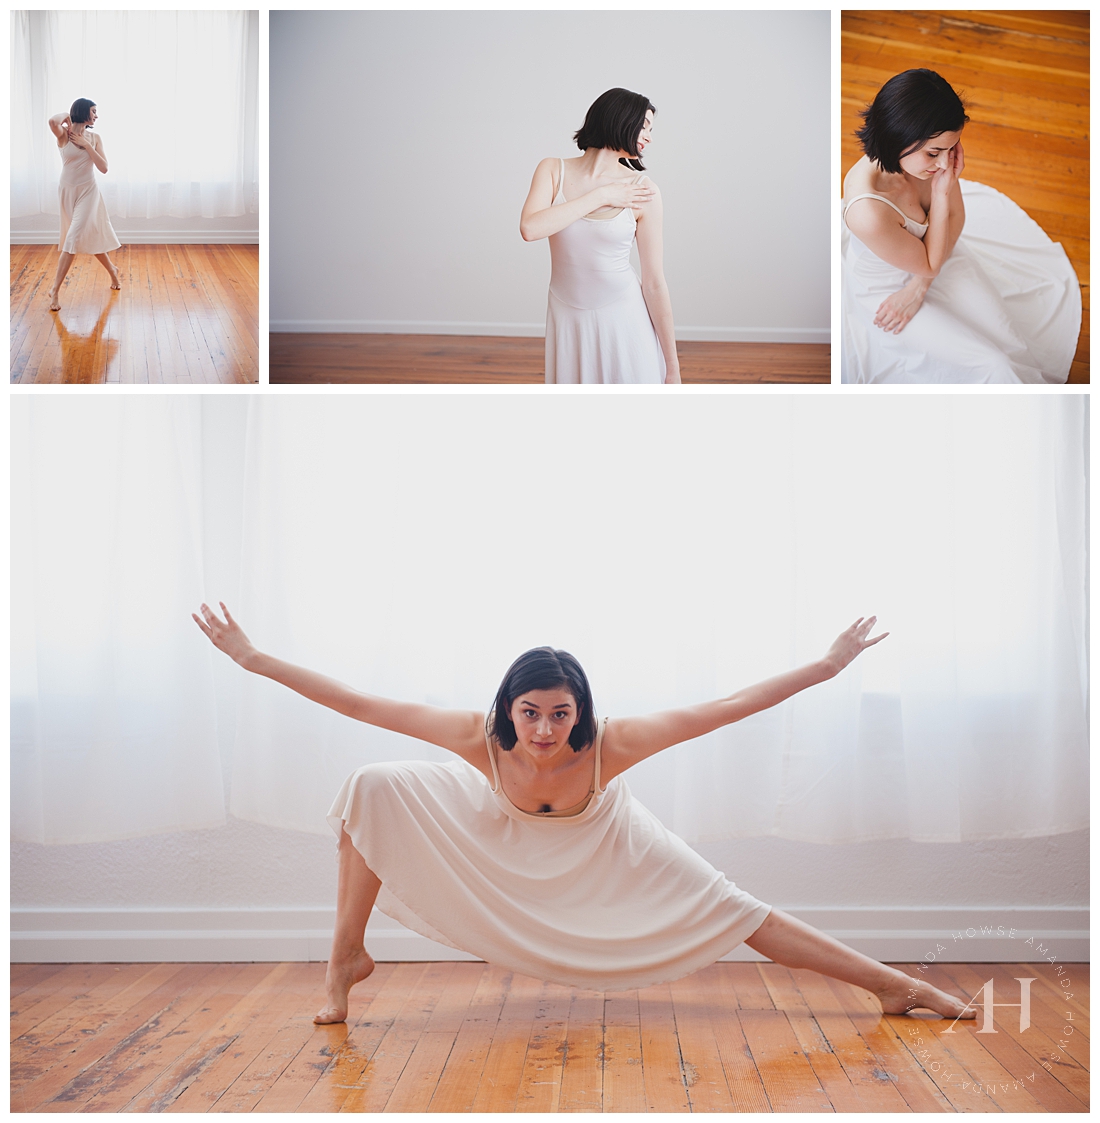 Modern Dance Portraits | Ballerina Sessions at Studio 253 on Hardwood Floors with Natural Light | Photographed by Amanda Howse